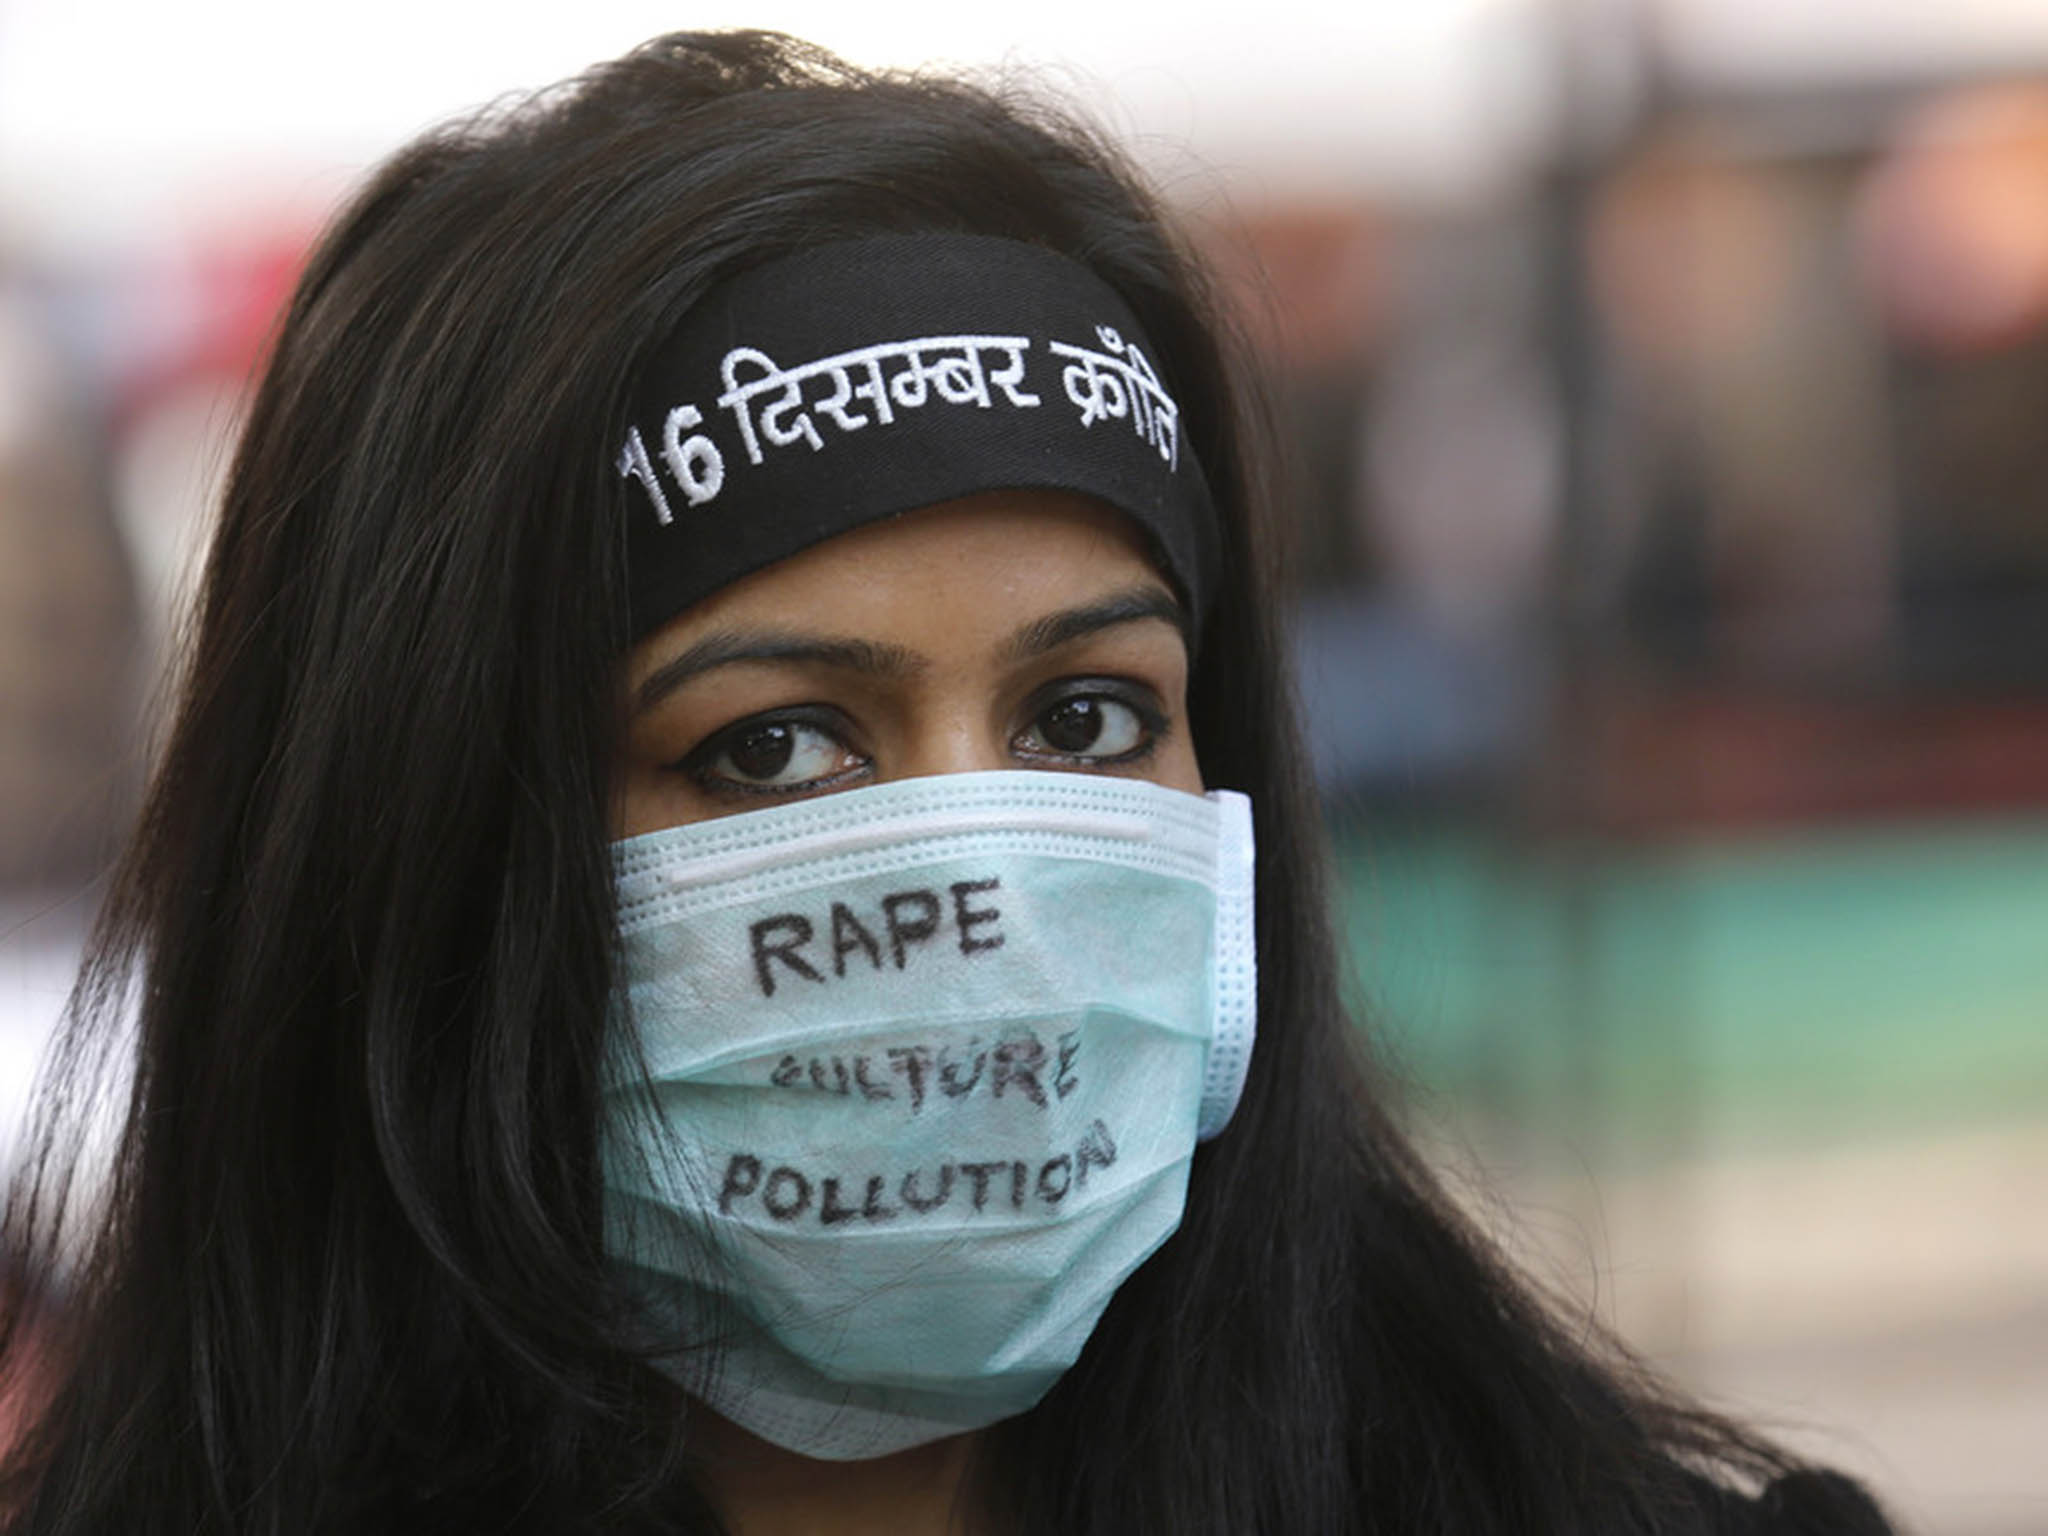 An activist takes part in a protest in December 2015 to mark the third anniversary of the Delhi bus gang rape